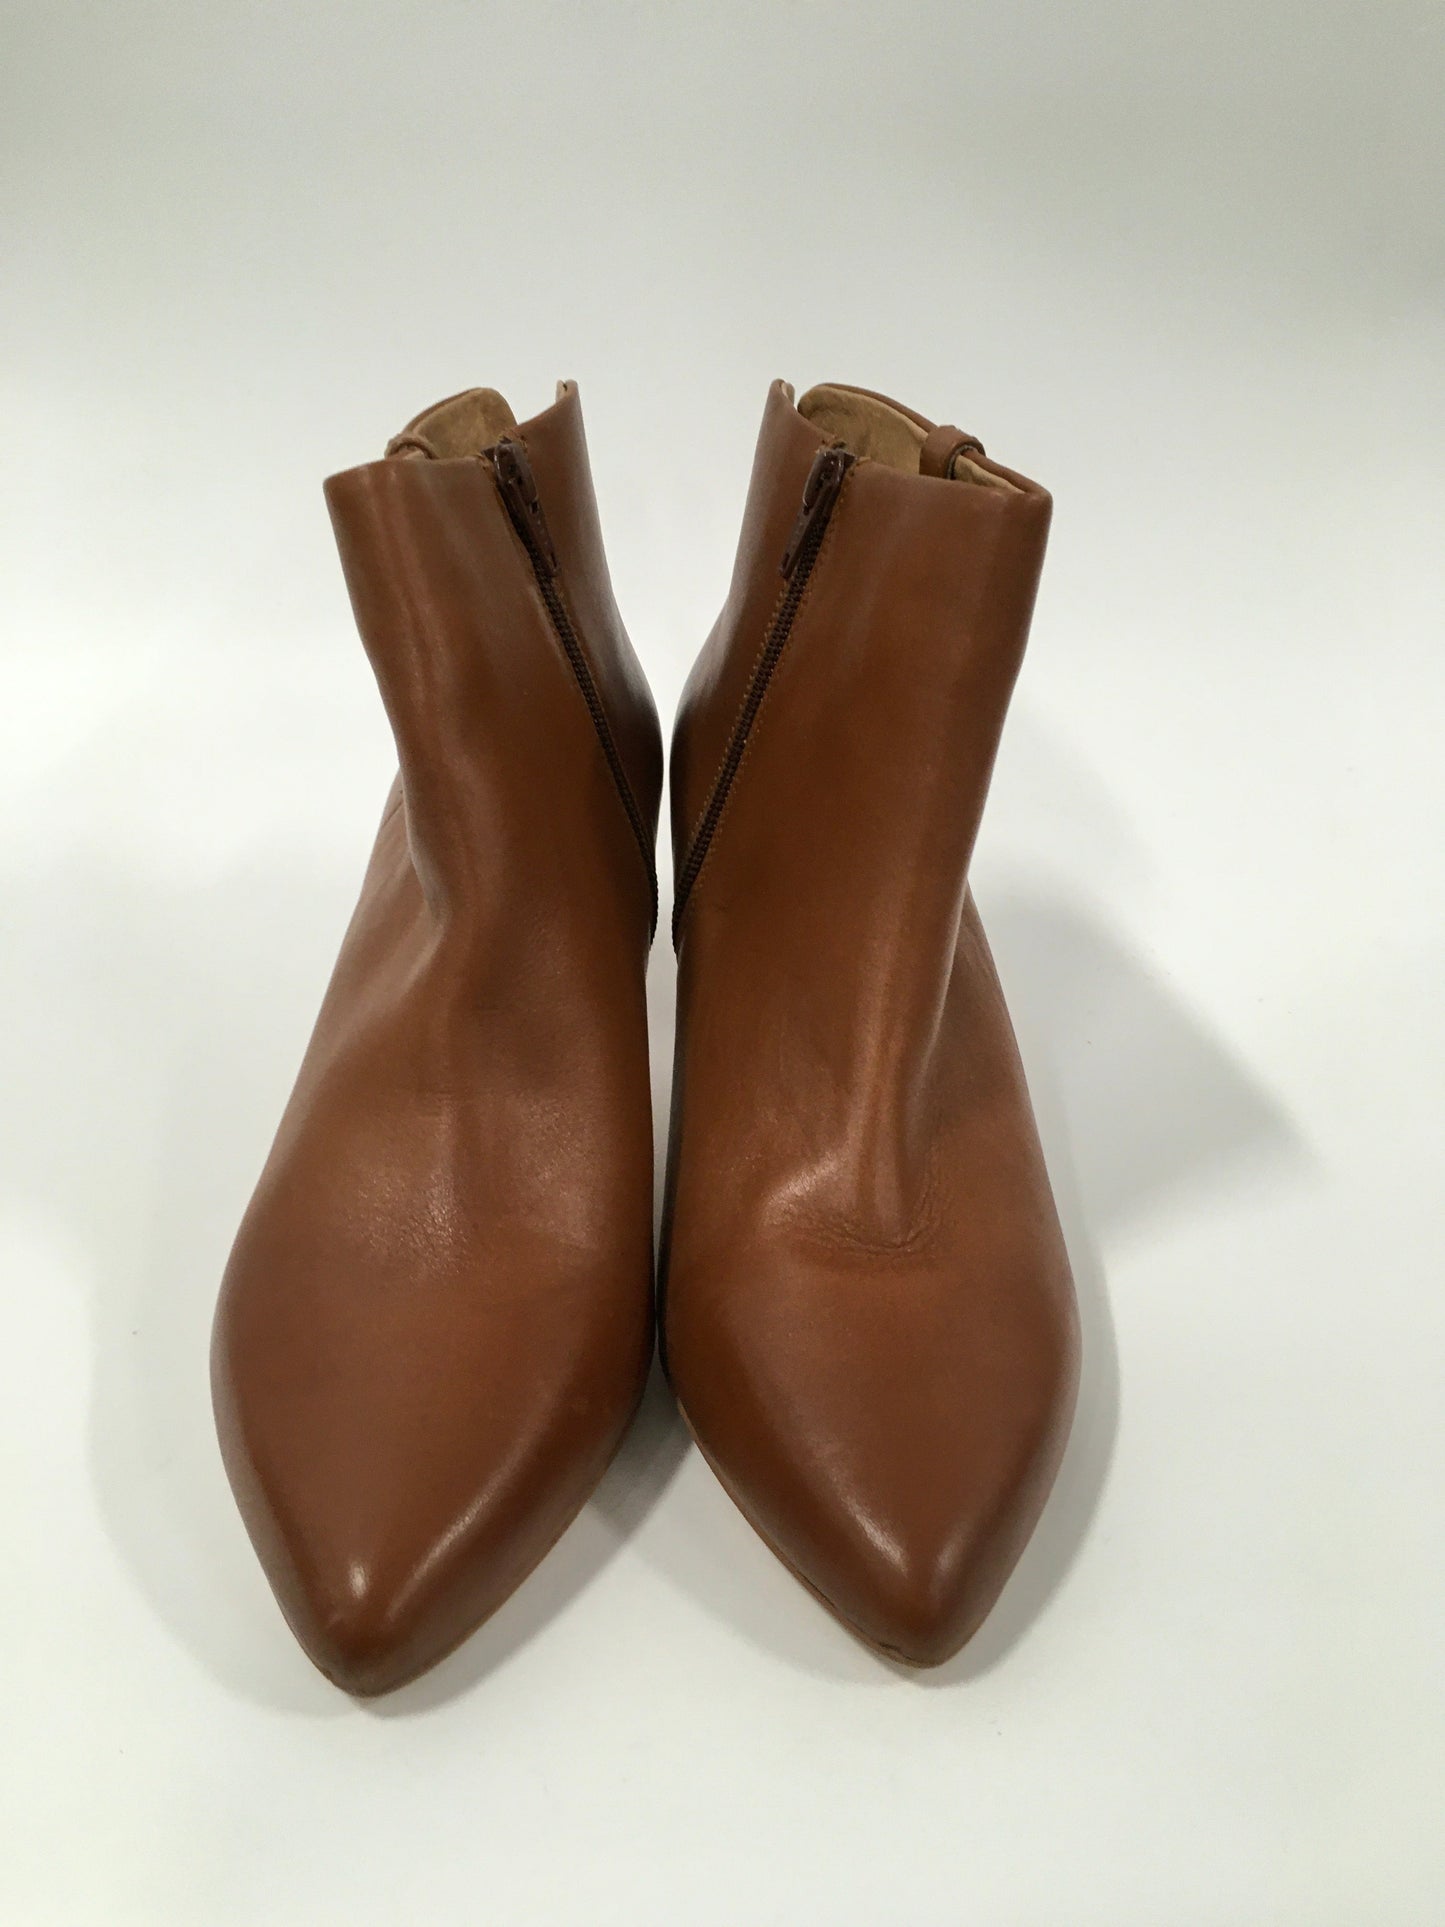 Brown Boots Ankle Heels Corso Cosmo, Size 8.5